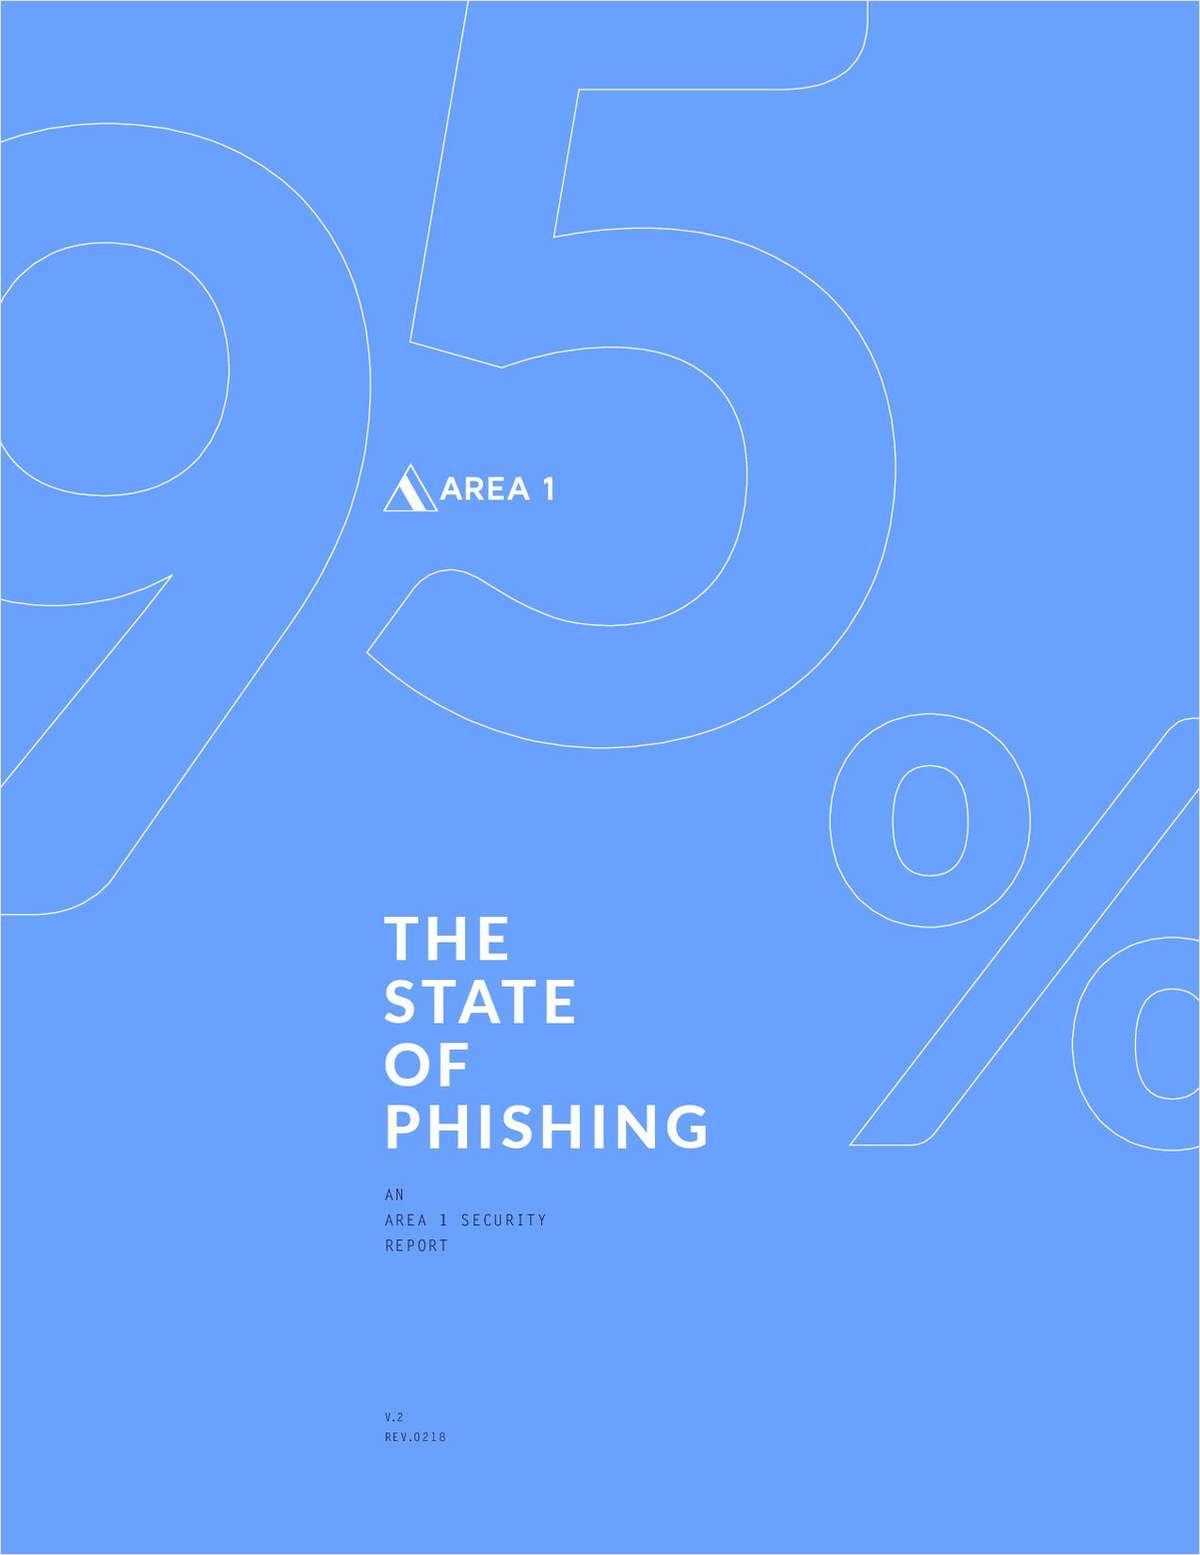 The State of Phishing